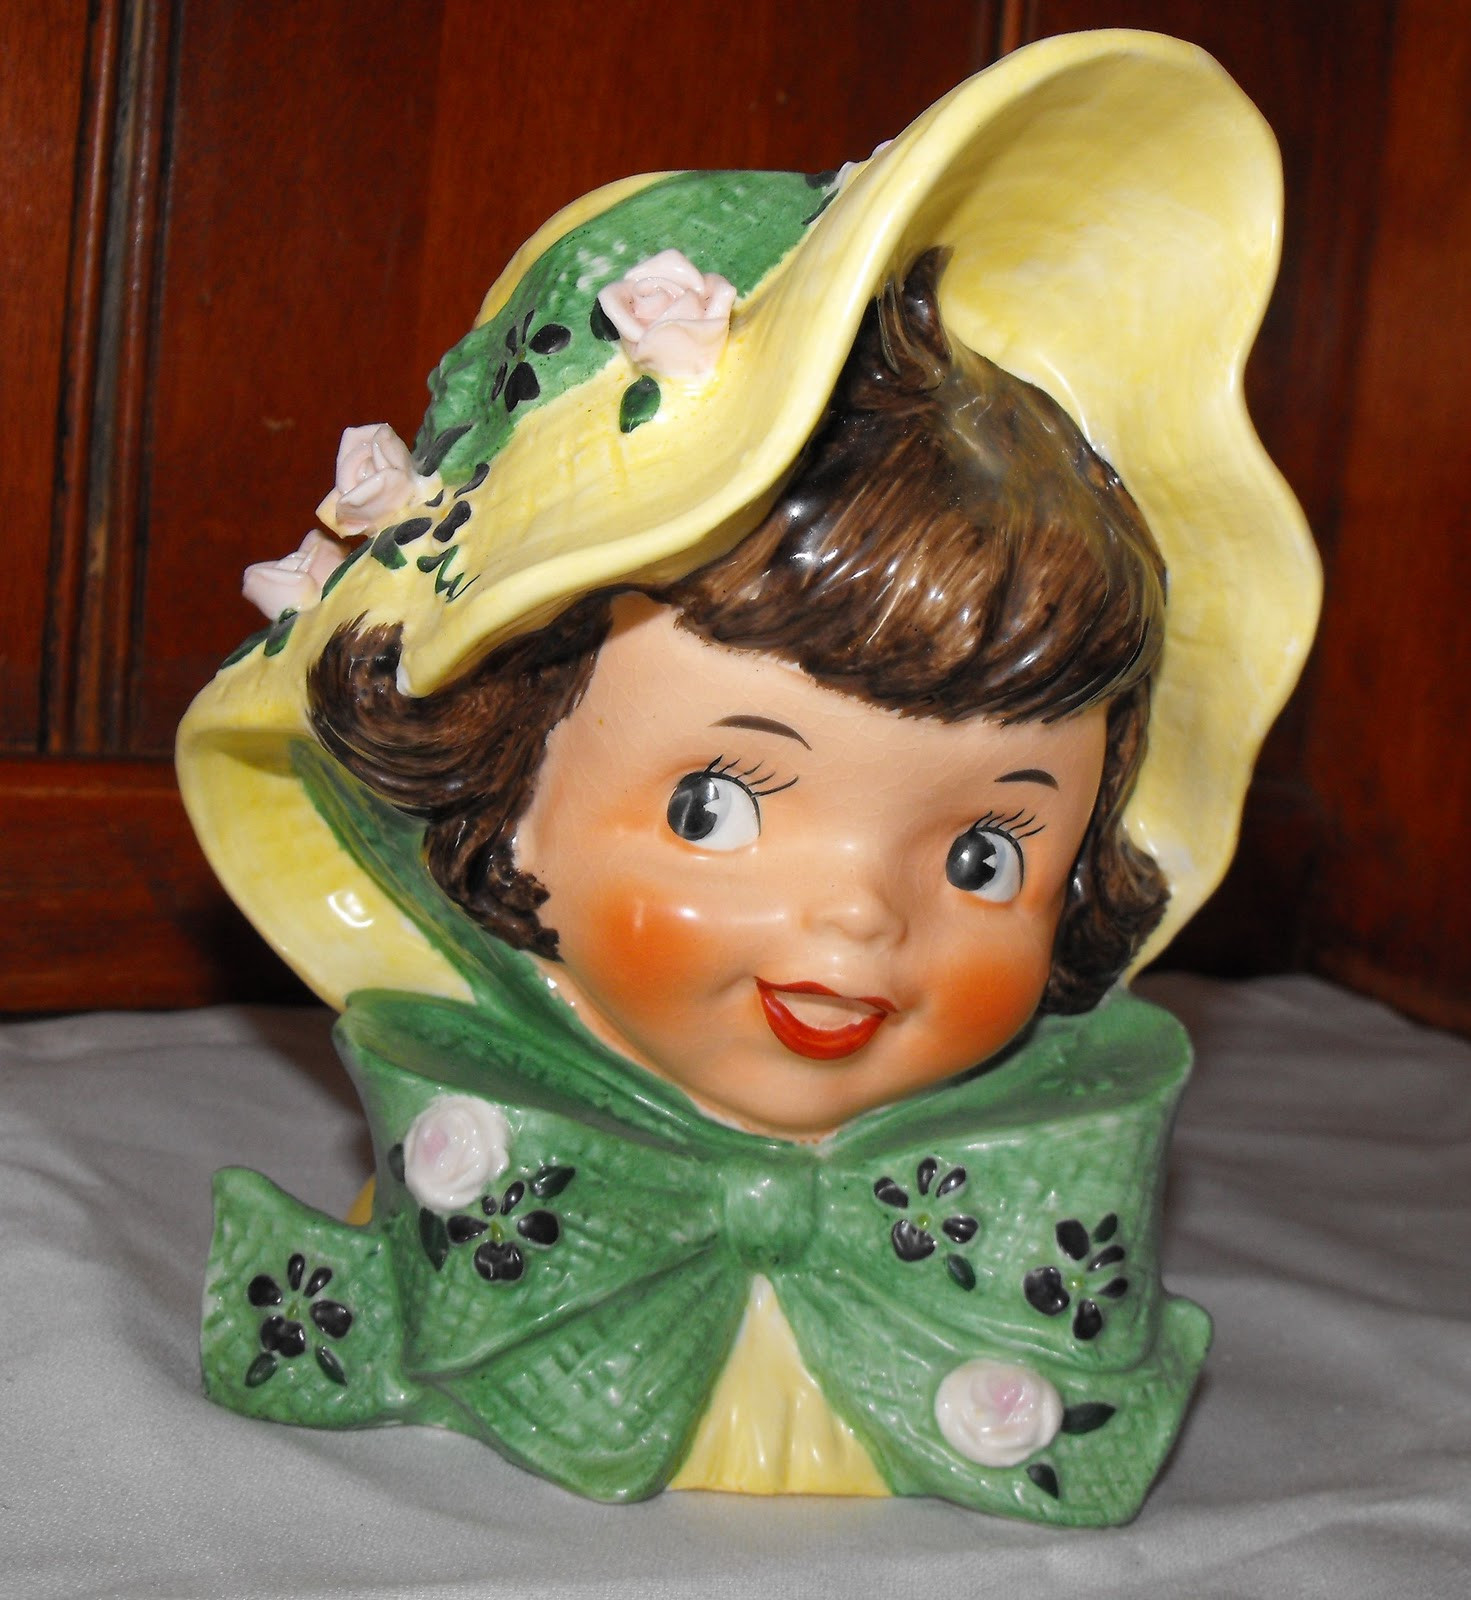 vintage napco lady head vase of a vintage green head vases for sunbonnet girl head vase was my first and remains in my collection